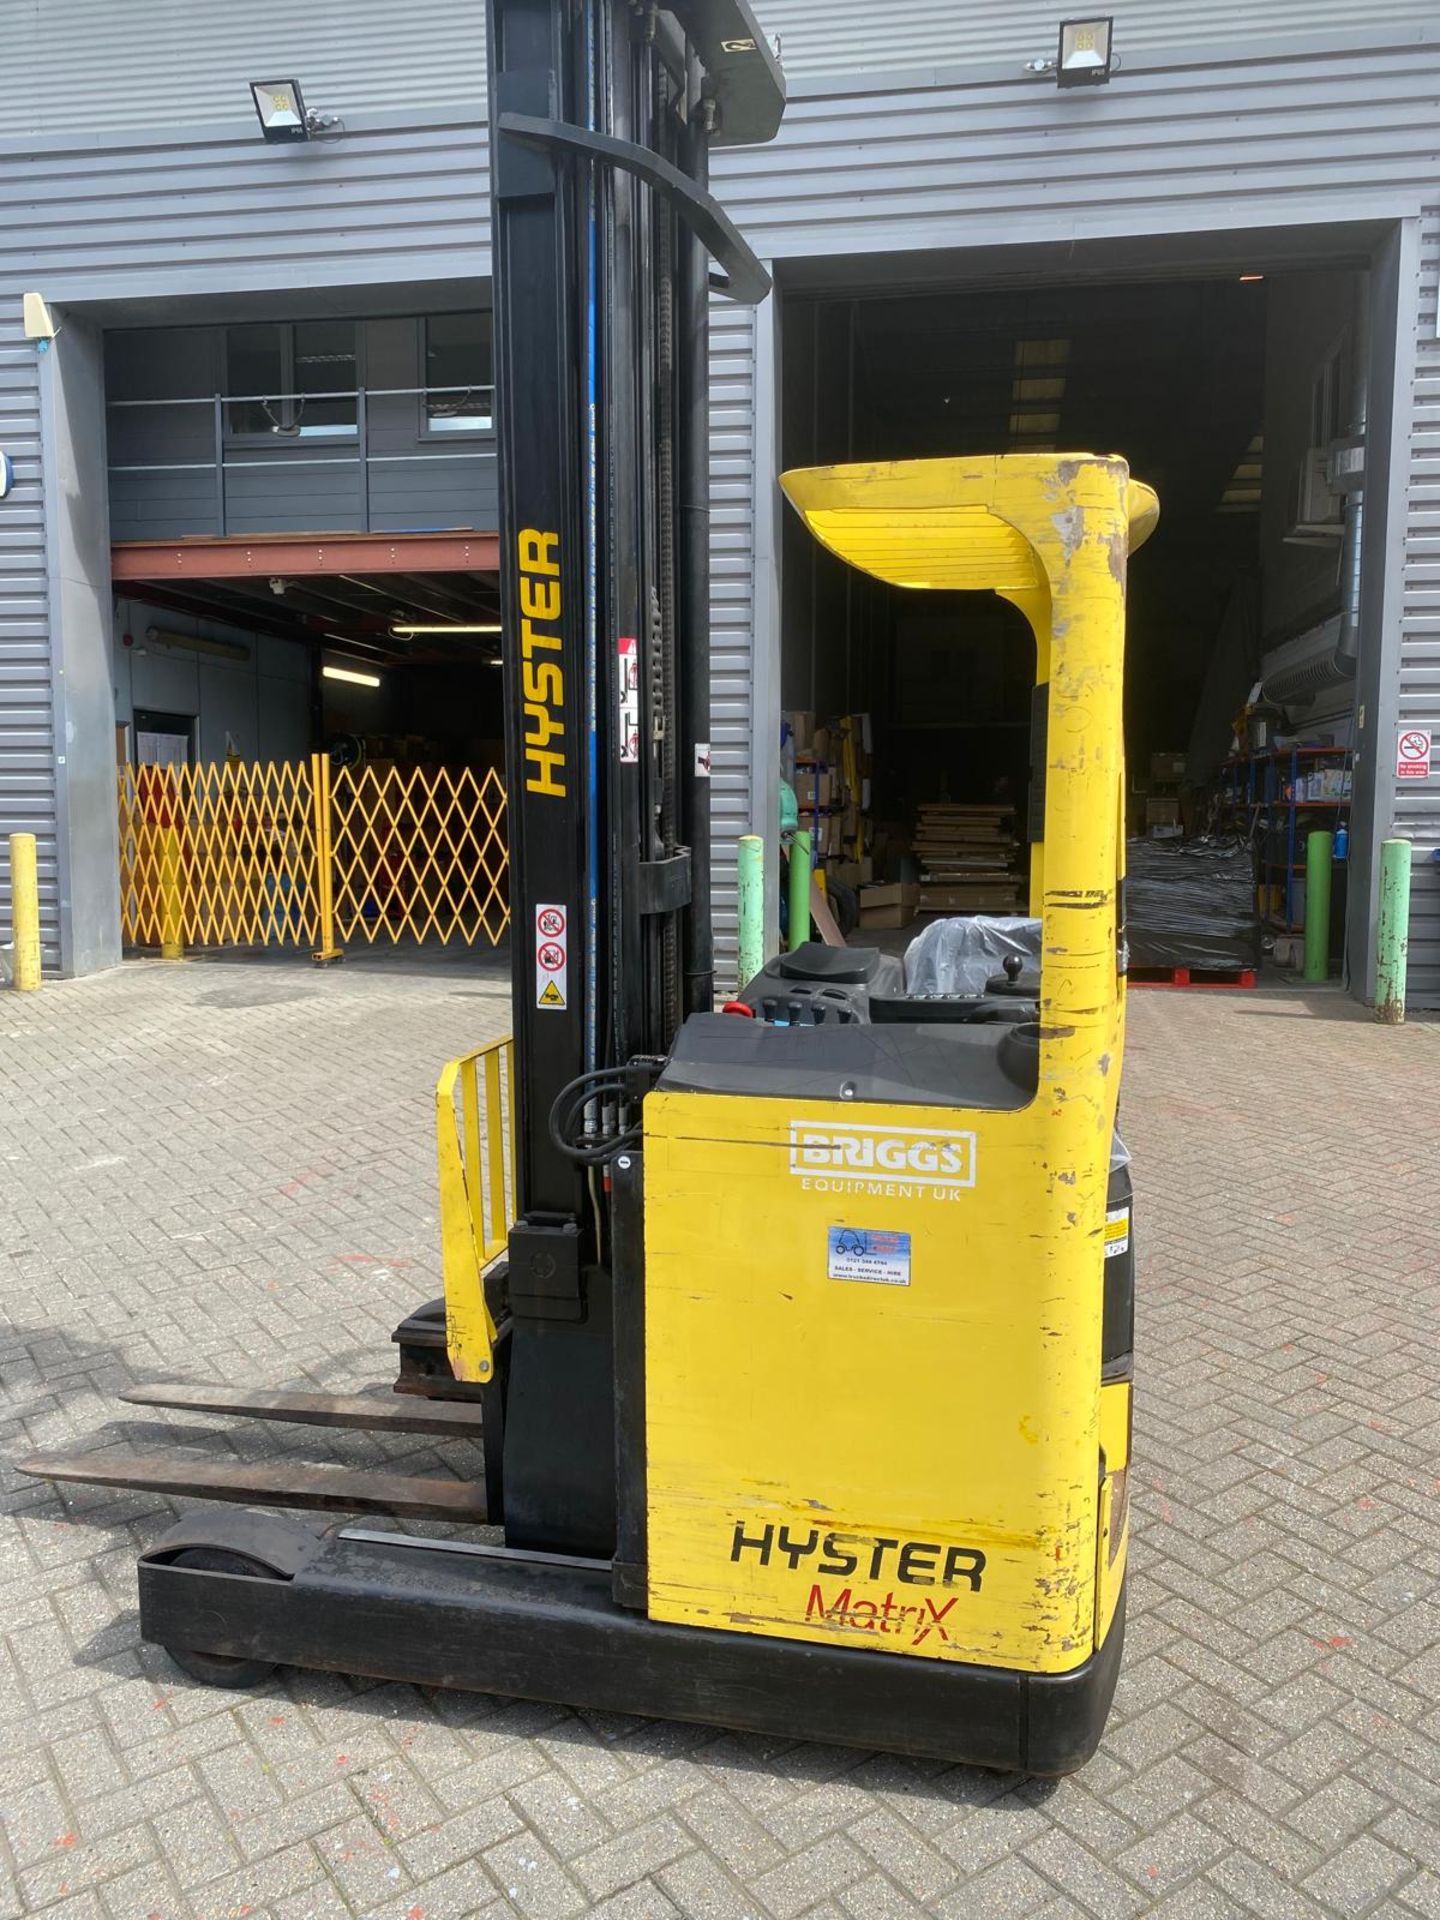 Hyster Forklift Reach Truck - Year: 2007 - 1,400kg Capacity - 8.5m Lift Height - Includes Charger - Image 2 of 10